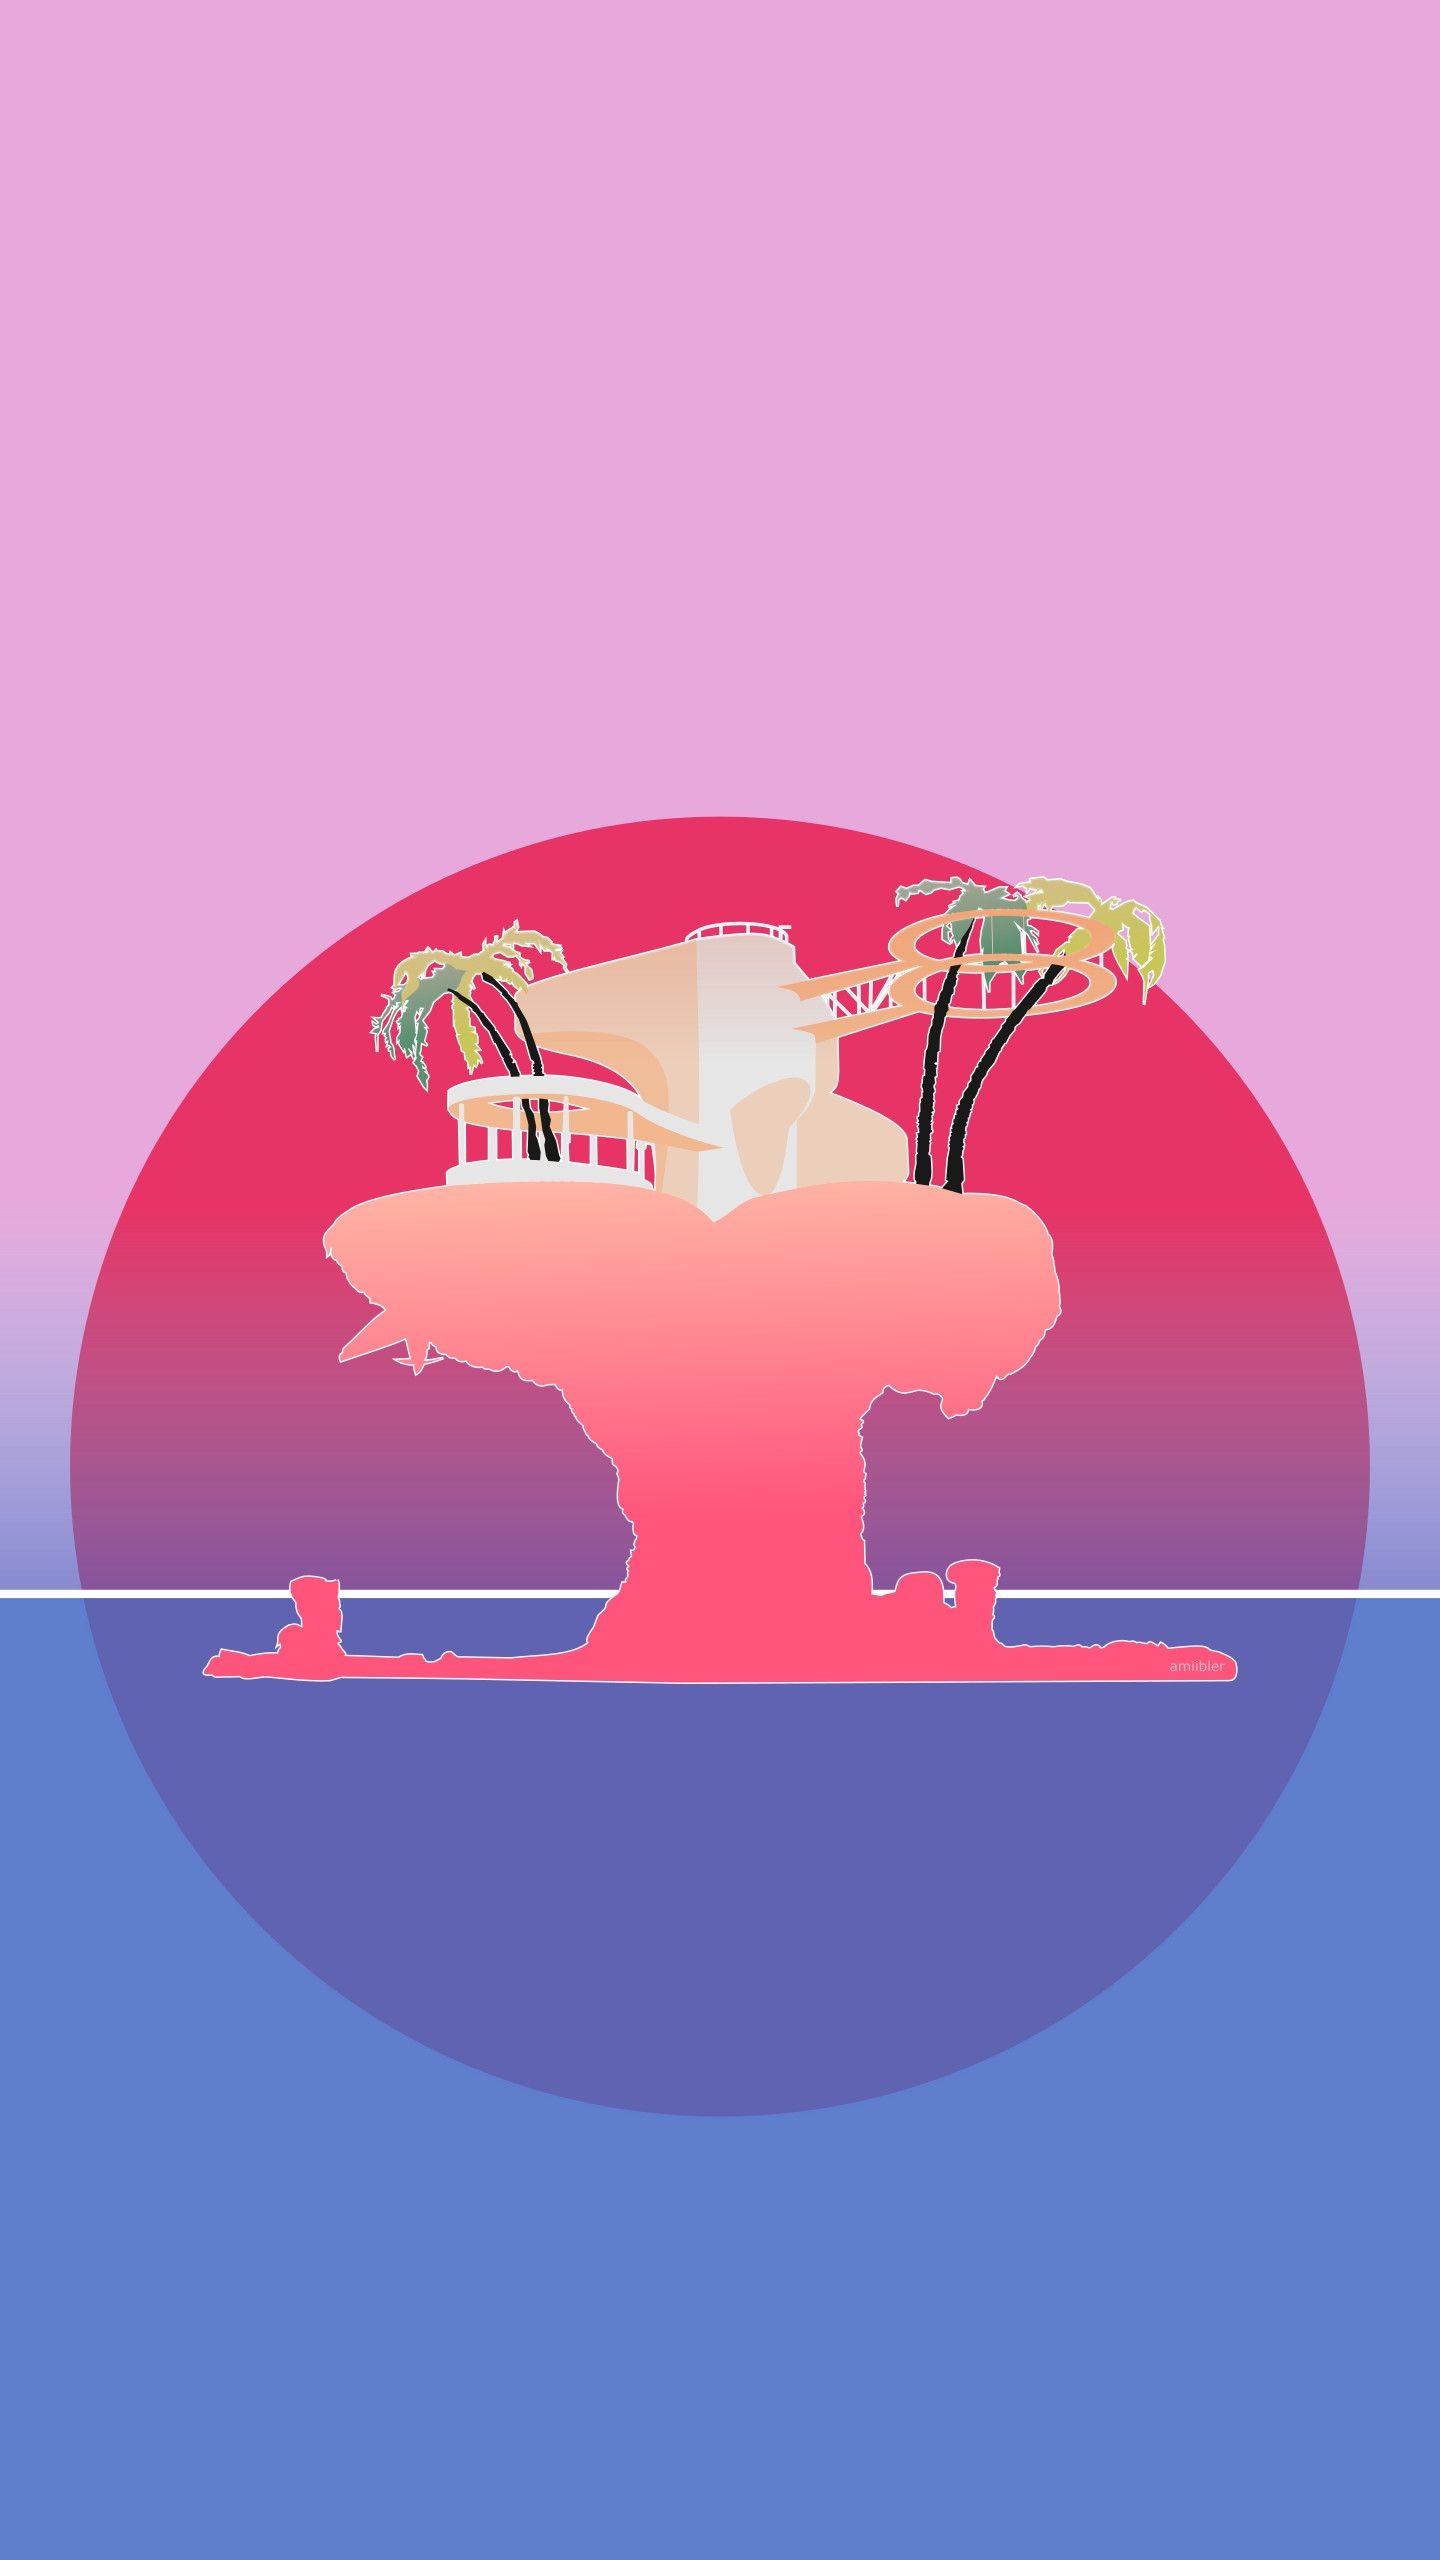 Gorillaz: Plastic Beach, The abandoned island, The songs conveying the ideas of pollution and the rise of cyberculture. 1440x2560 HD Background.